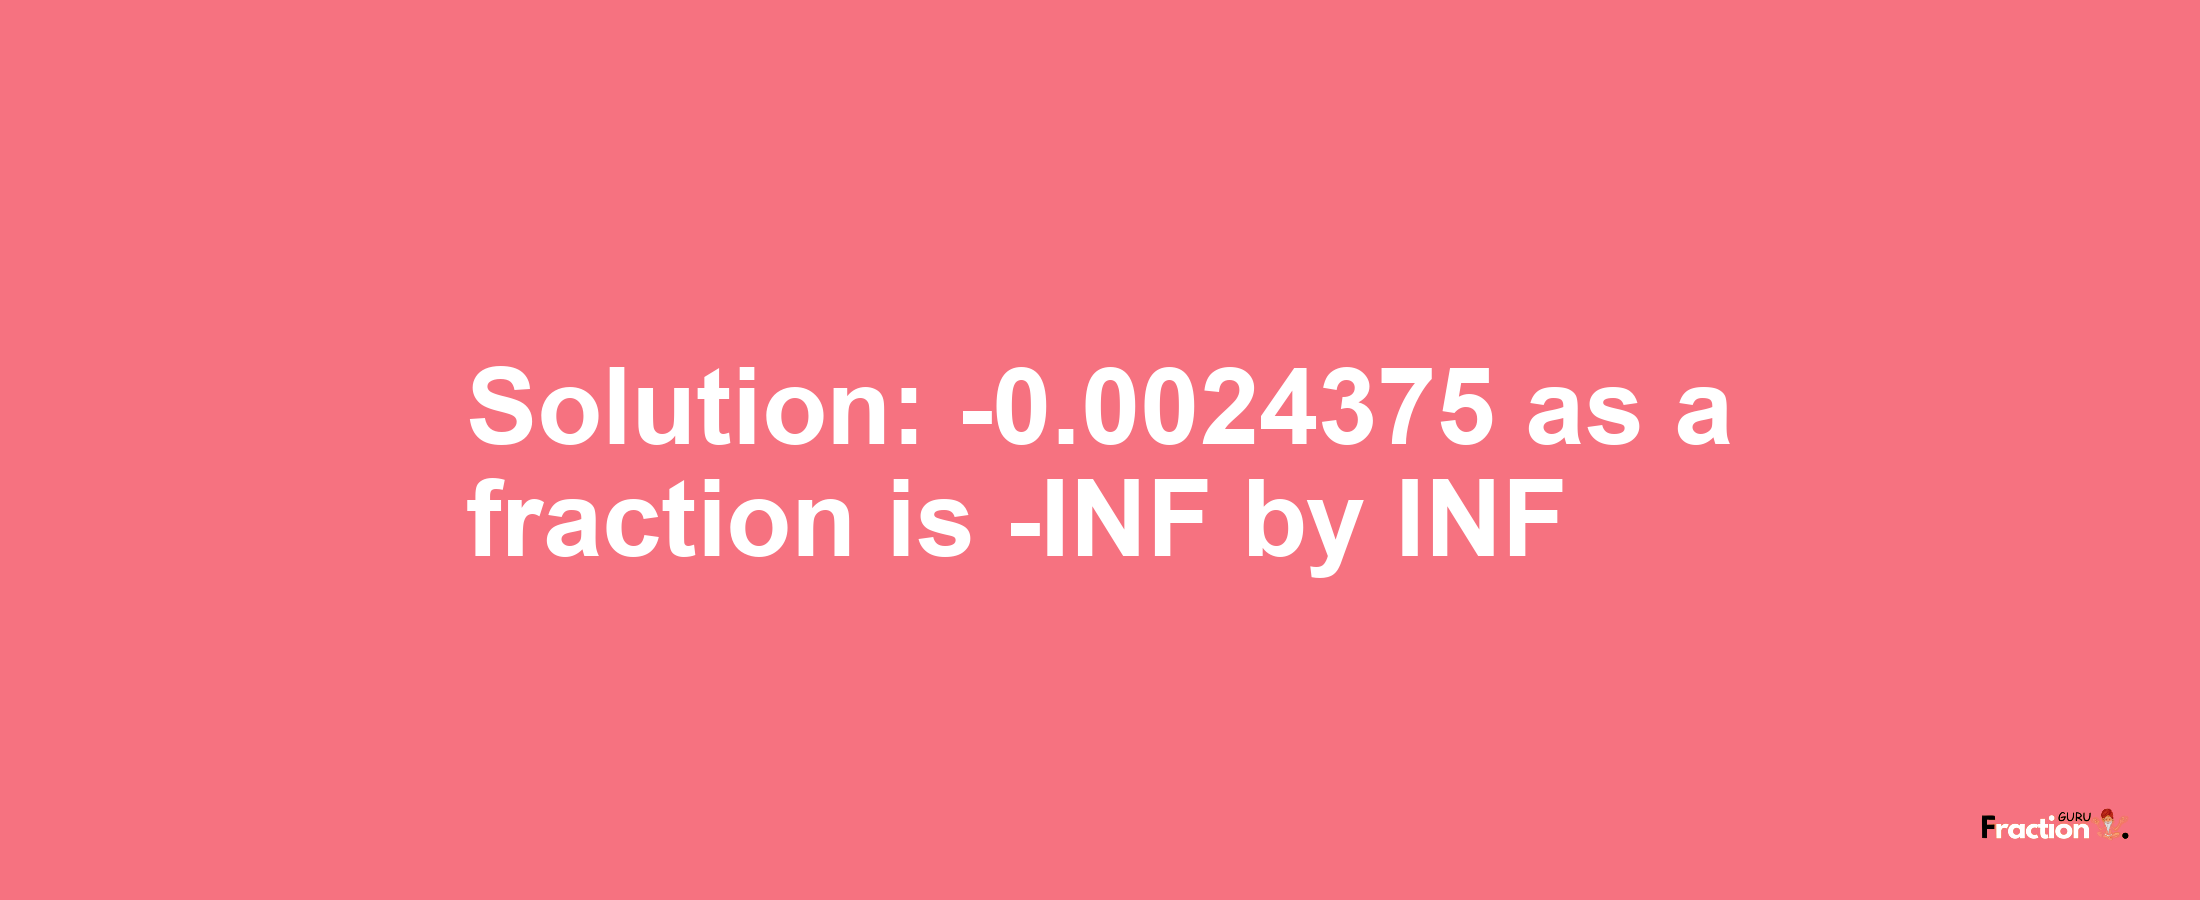 Solution:-0.0024375 as a fraction is -INF/INF